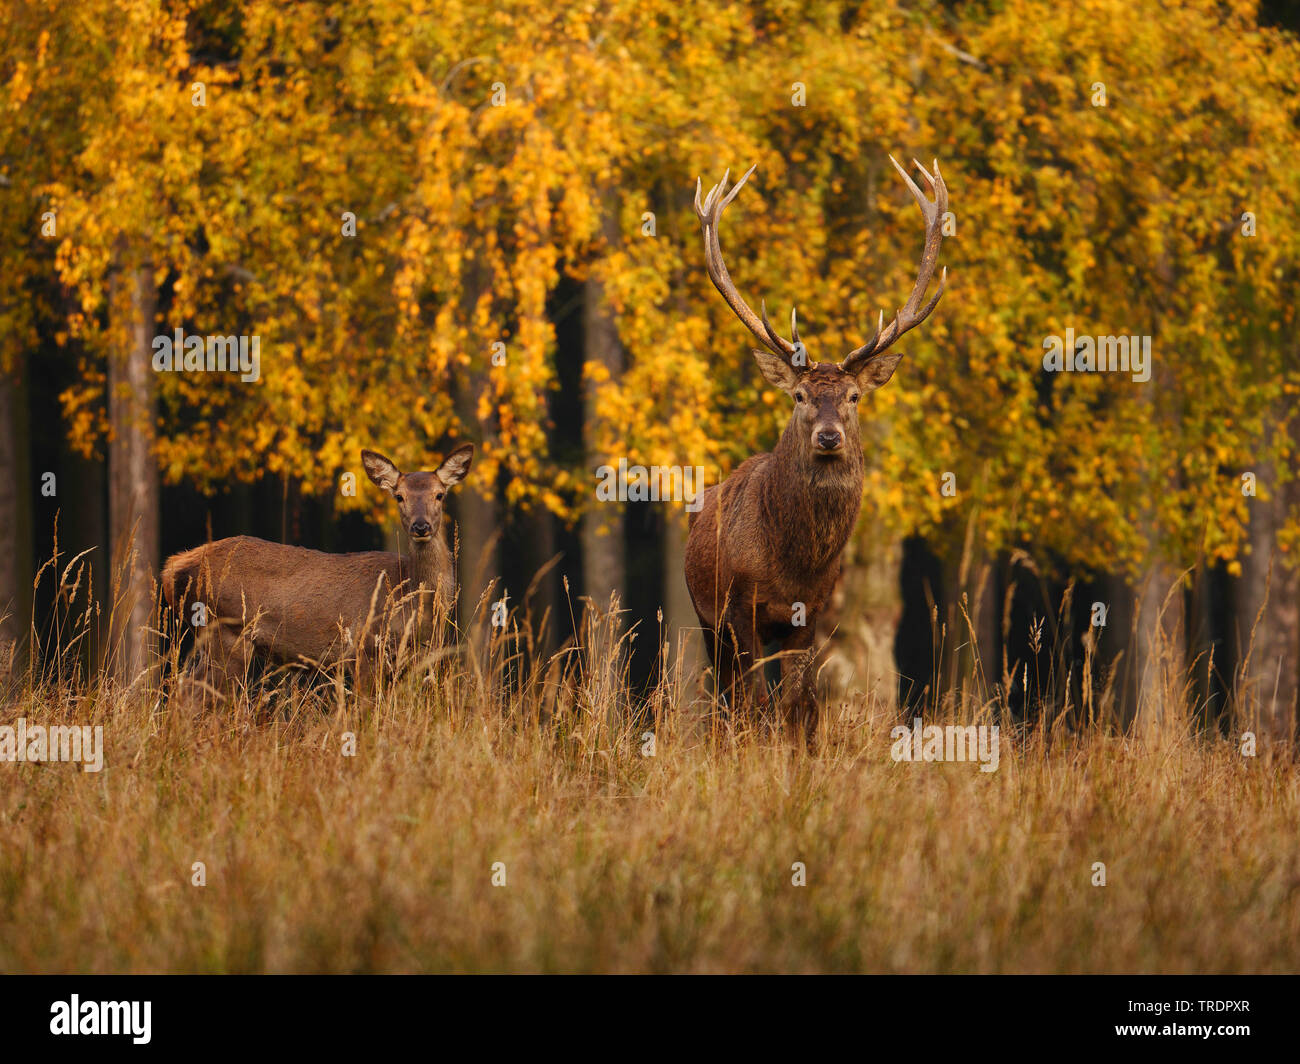 red deer (Cervus elaphus), red deer hind and red deer stag in an autumn forest, Germany, Saxony Stock Photo